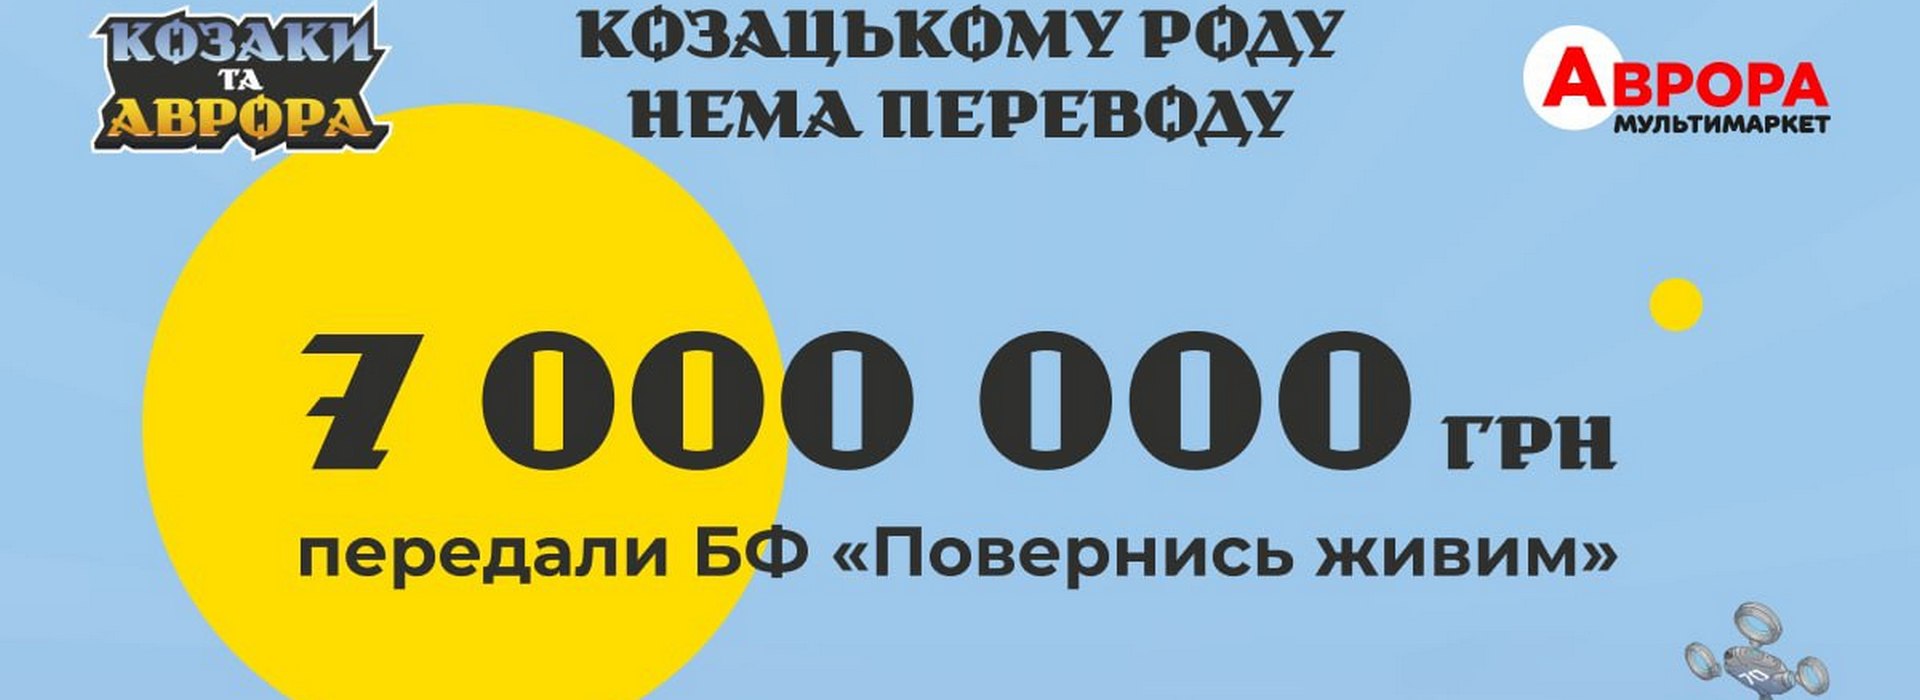 UAH 7 Million for the Armed Forces of Ukraine: the Multi-Market Chain “Aurora” Multiplied by Two the UAH 3.5 Million Collected during the “Cossacks and Aurora” Campaign